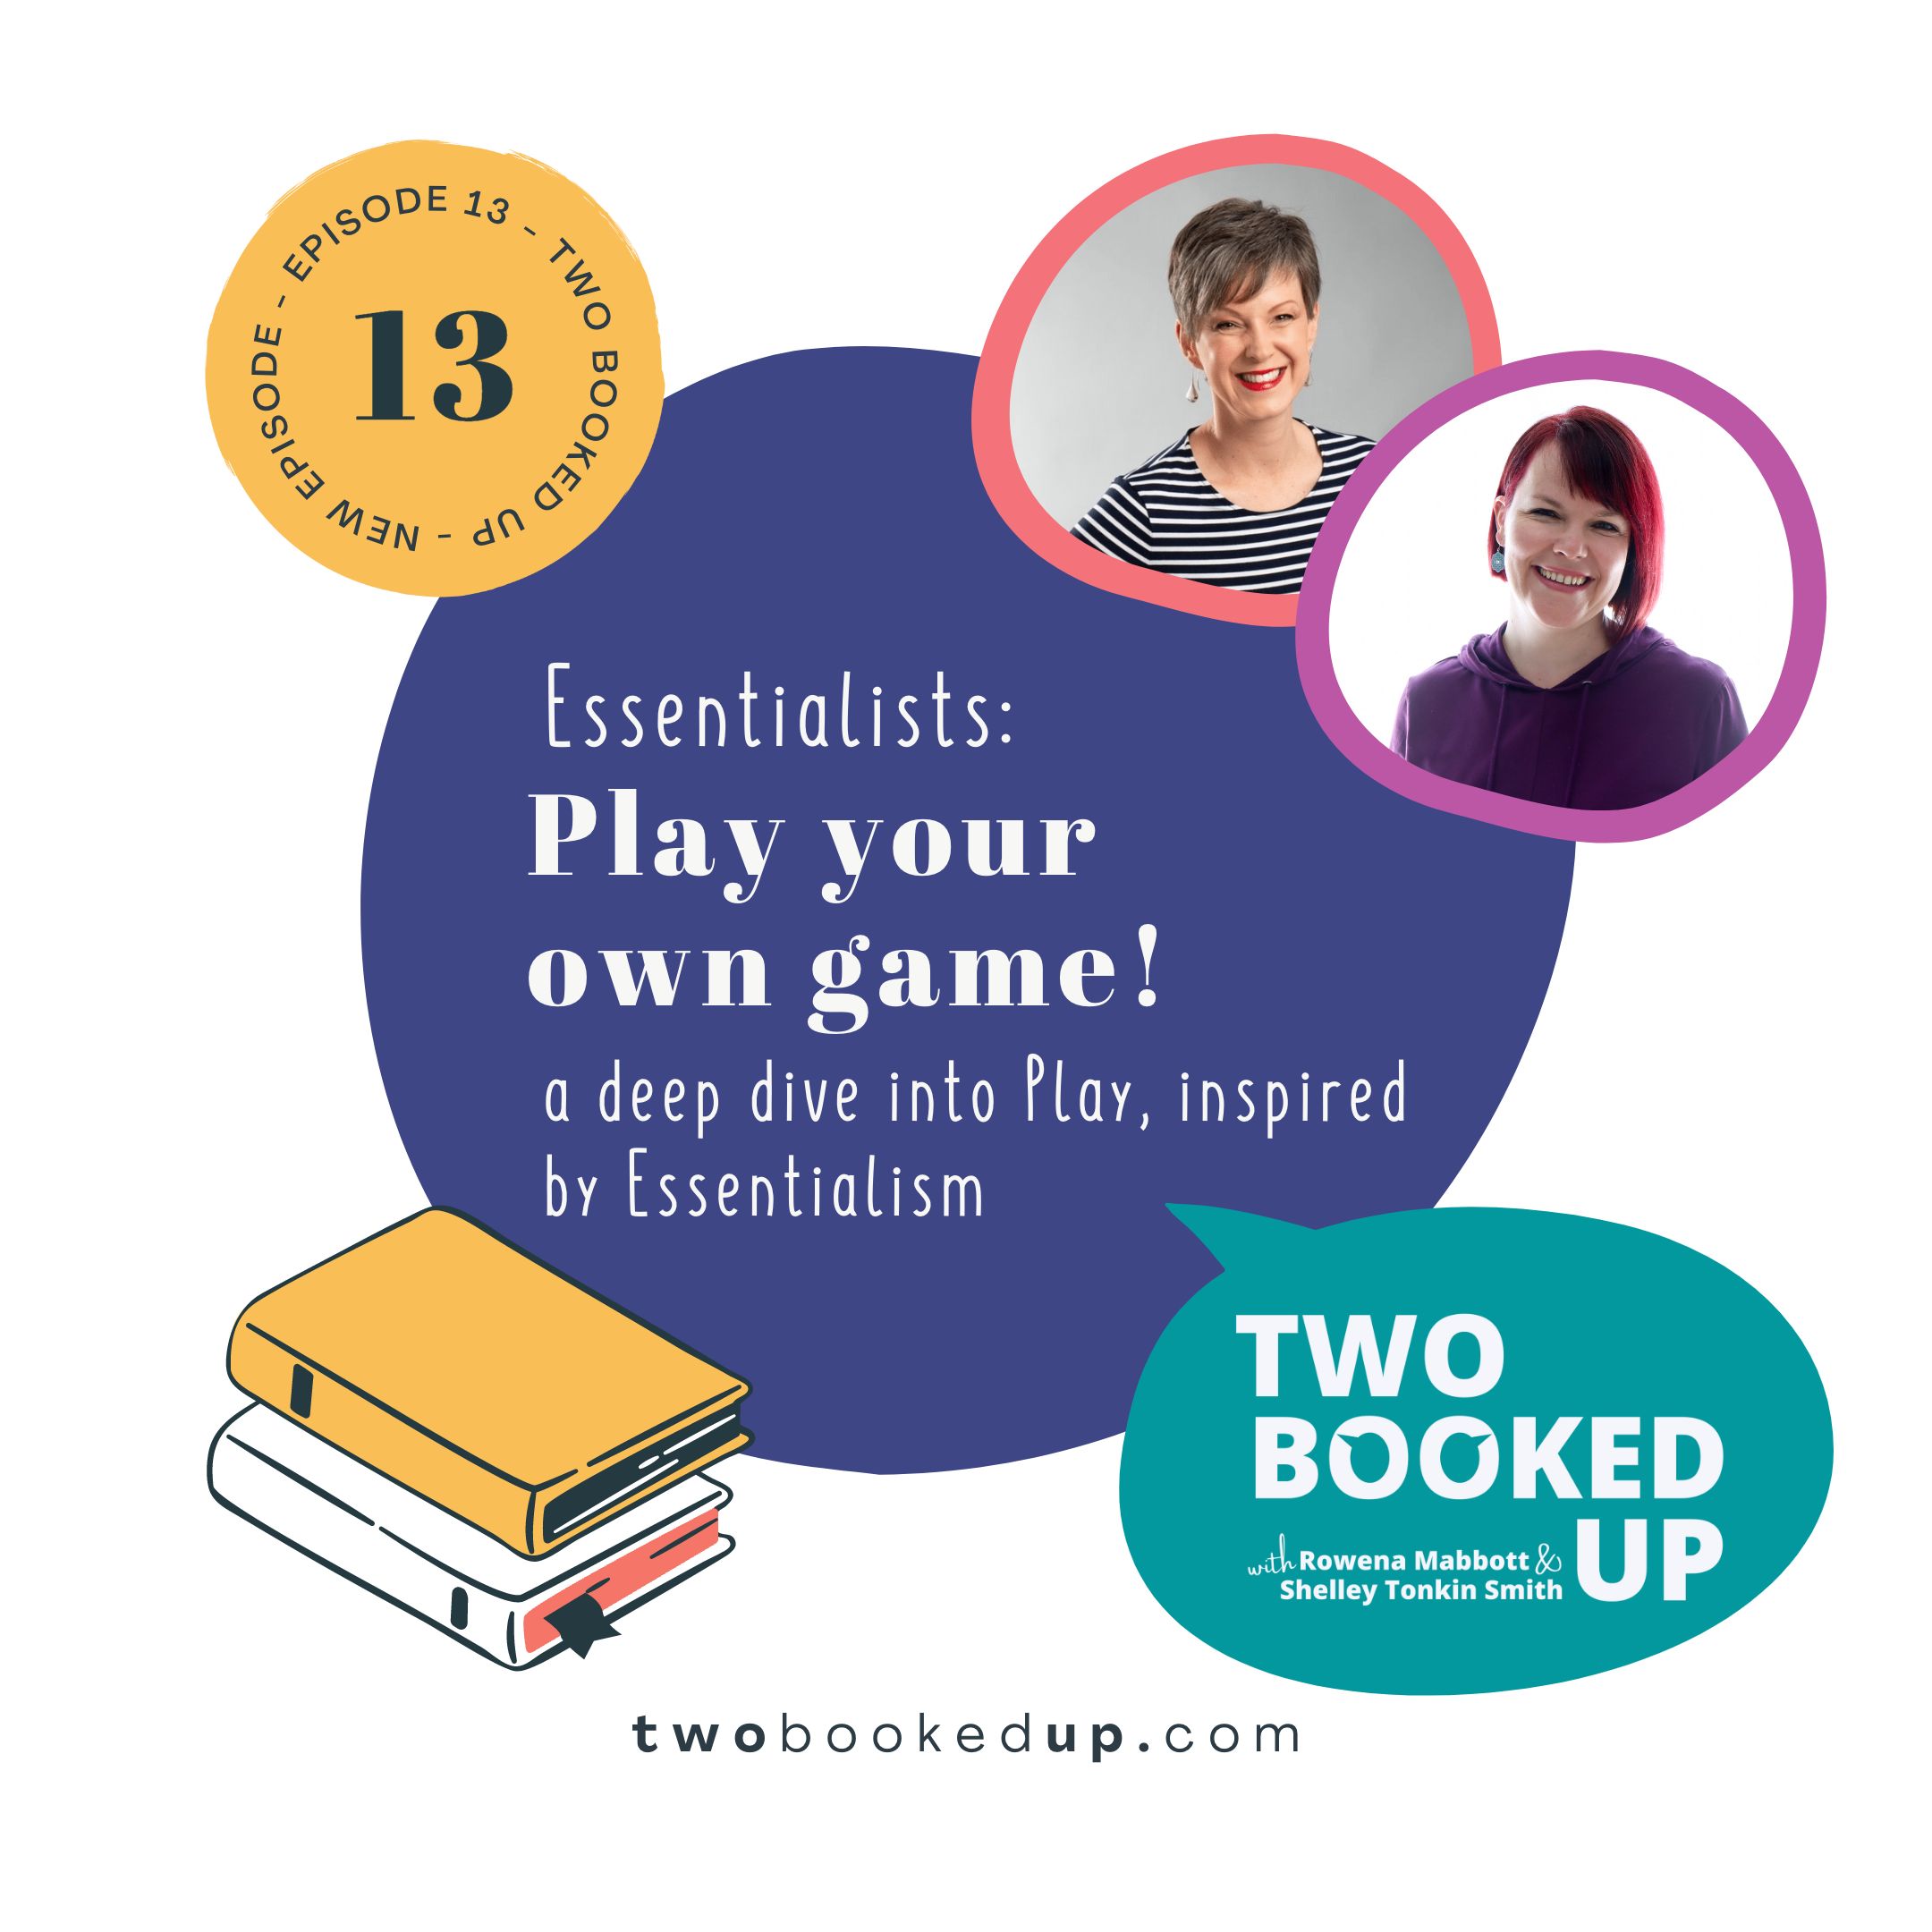 TBU#13 Play your own game, Essentialists! A deep dive into PLAY, inspired by Essentialism by Greg McKeown